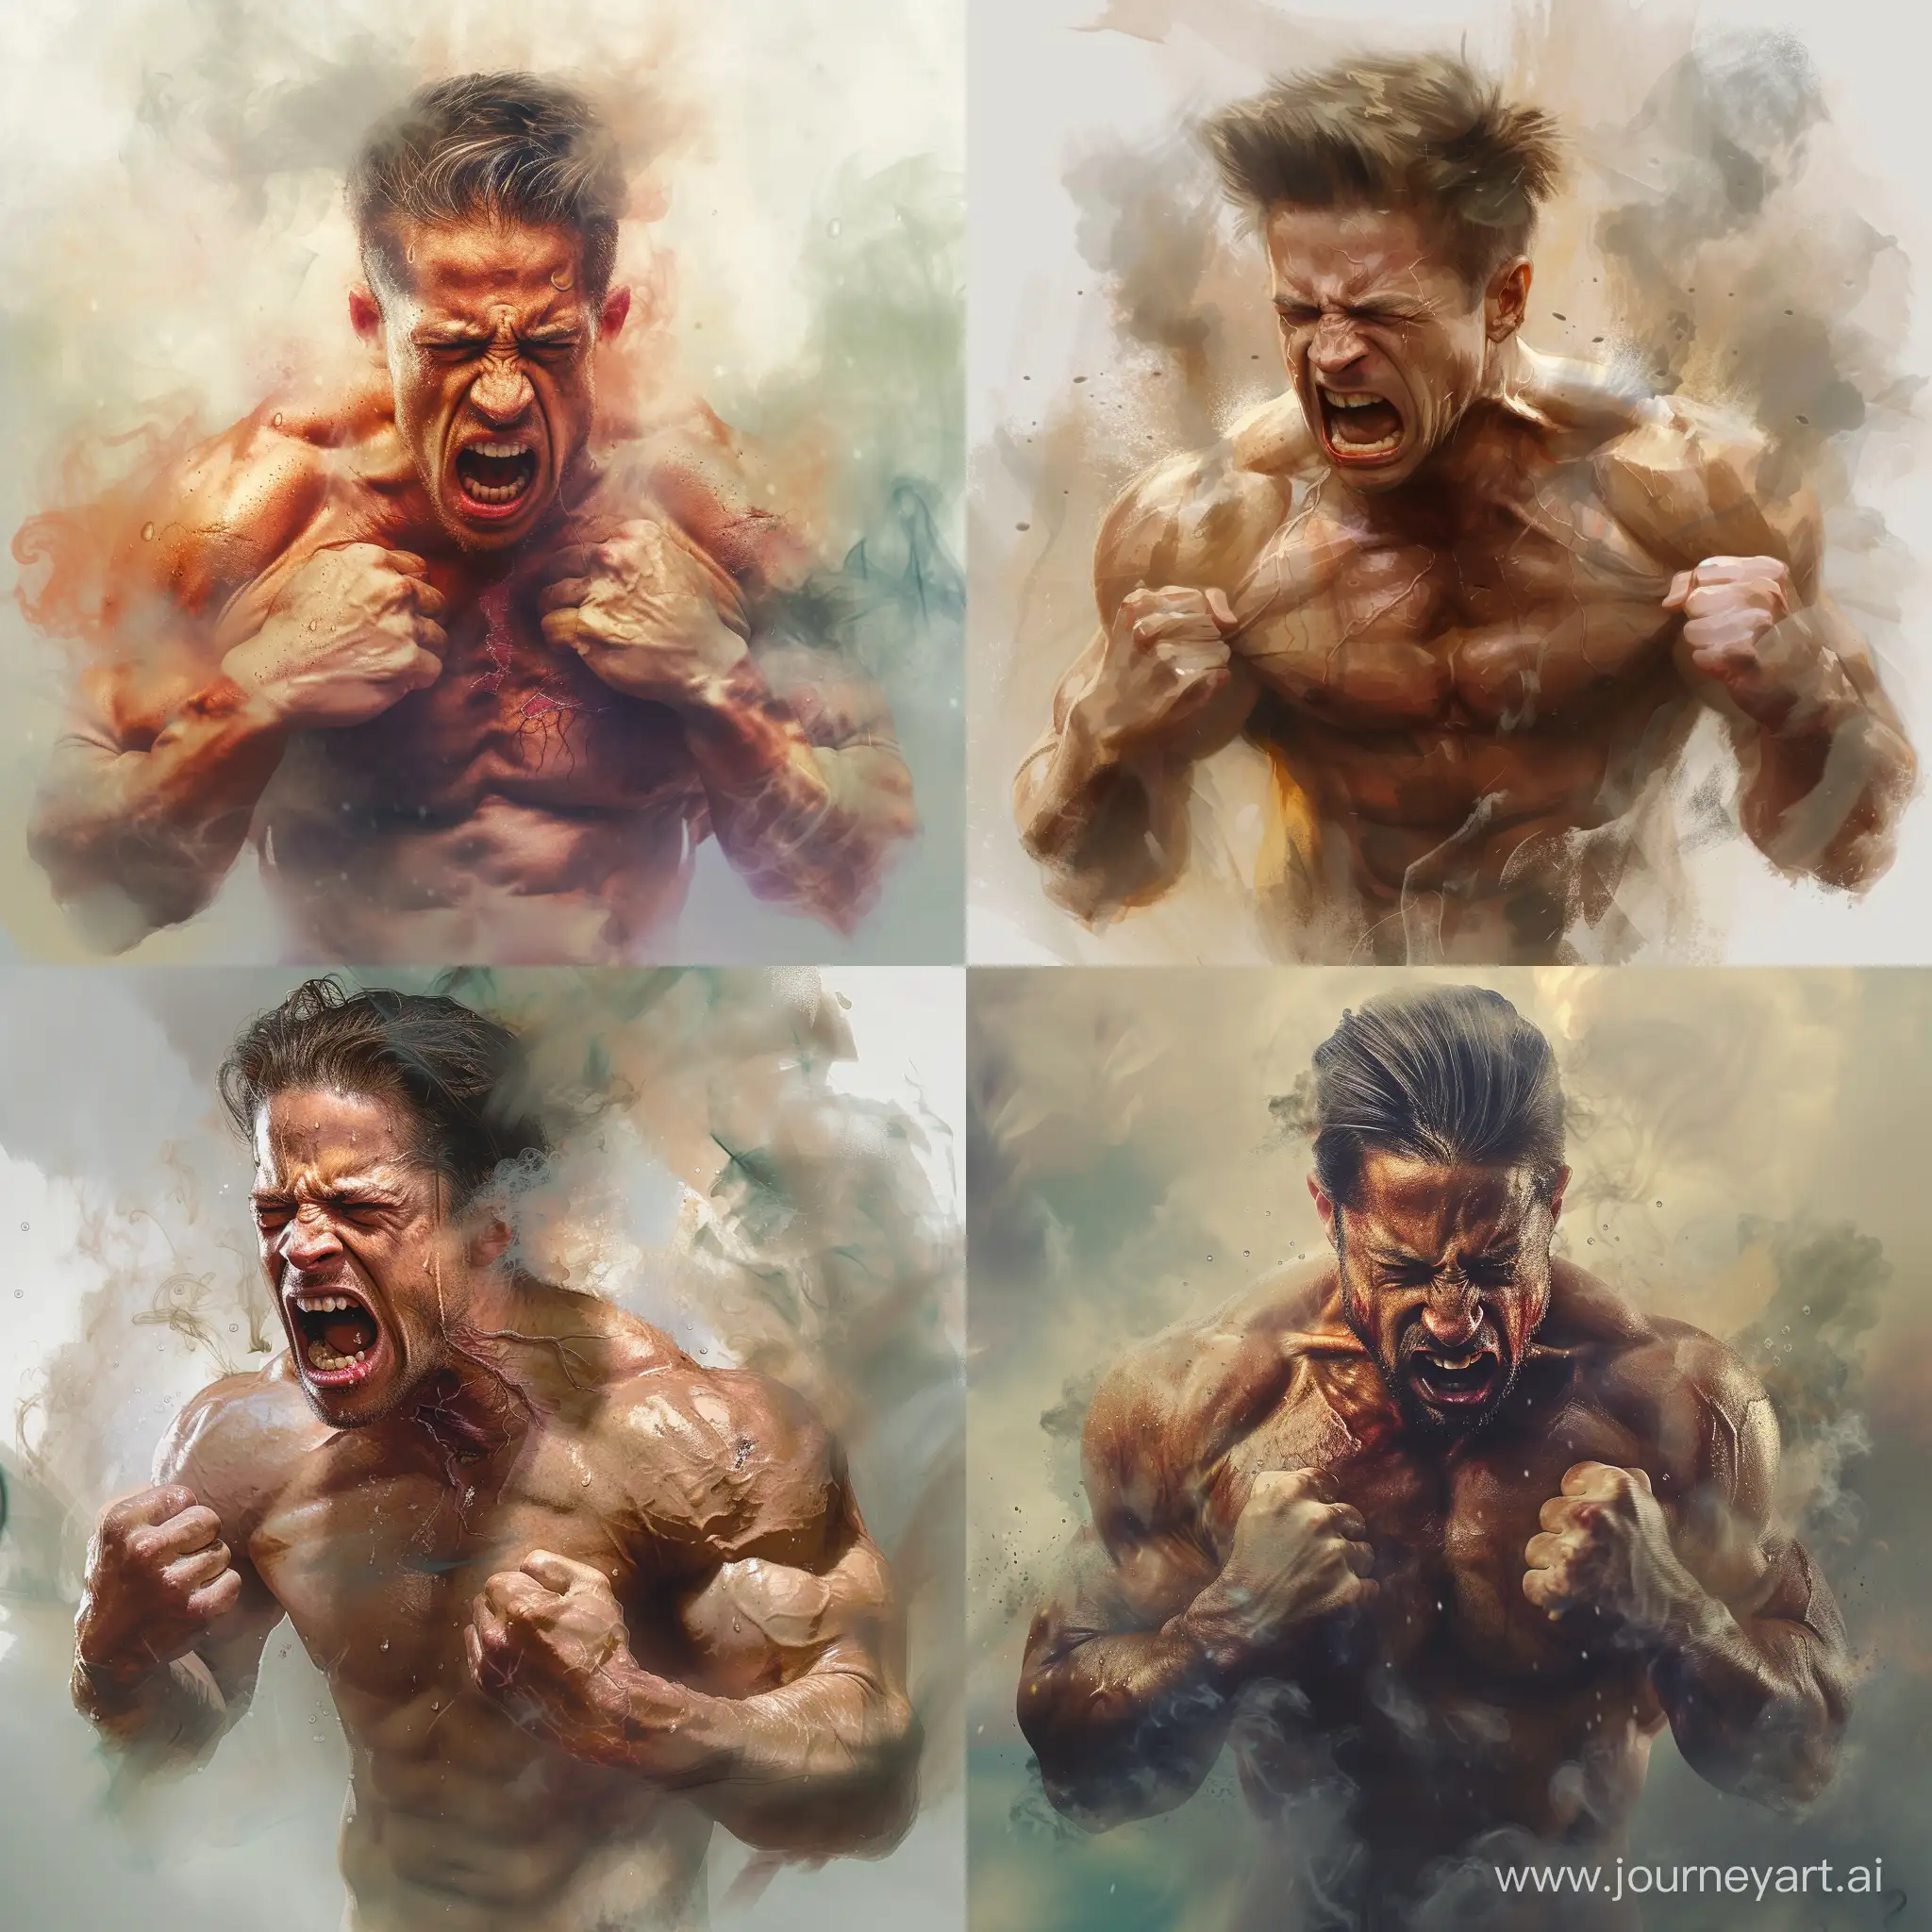 A full body realistic picture of a very angry brad pitt without a shirt, burning with anger, squeezing his muscles, showing his veins, drops of sweat, and smoke coming from his ears, with soft lighting, a blurry fading background, and melting colors.